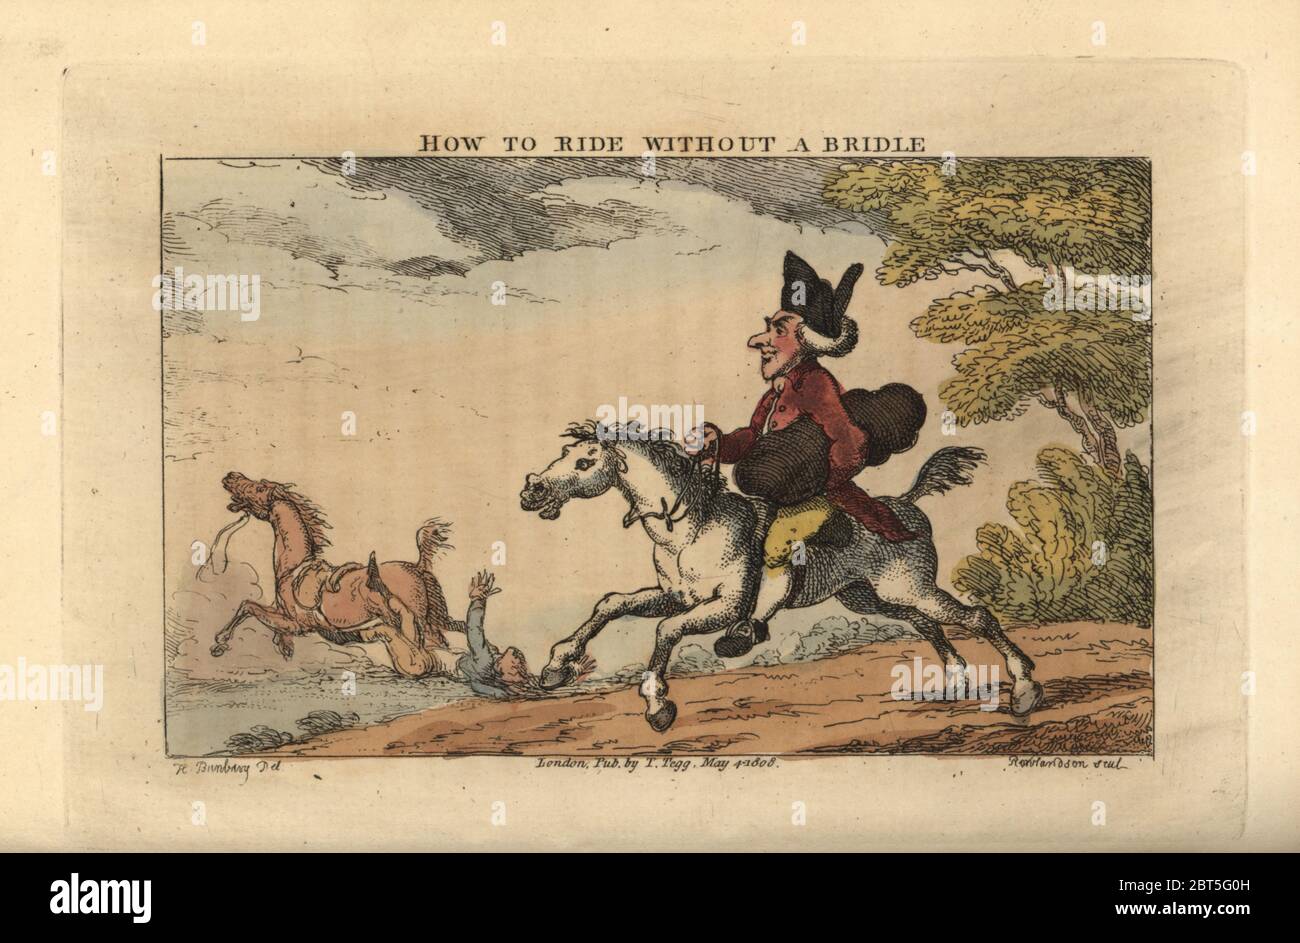 Regency gentleman riding a horse with only a string around its neck. A man is dragged off by a horse, his foot caught in a stirrup, in the background. How to Ride Without a Bridle. Handcoloured copperplate engraving by Thomas Rowlandson after an illustration by Henry Bunbury from Geoffrey Gambados An Academy for Grown Horsemen and Annals of Horsemanship, London, 1809. Stock Photo